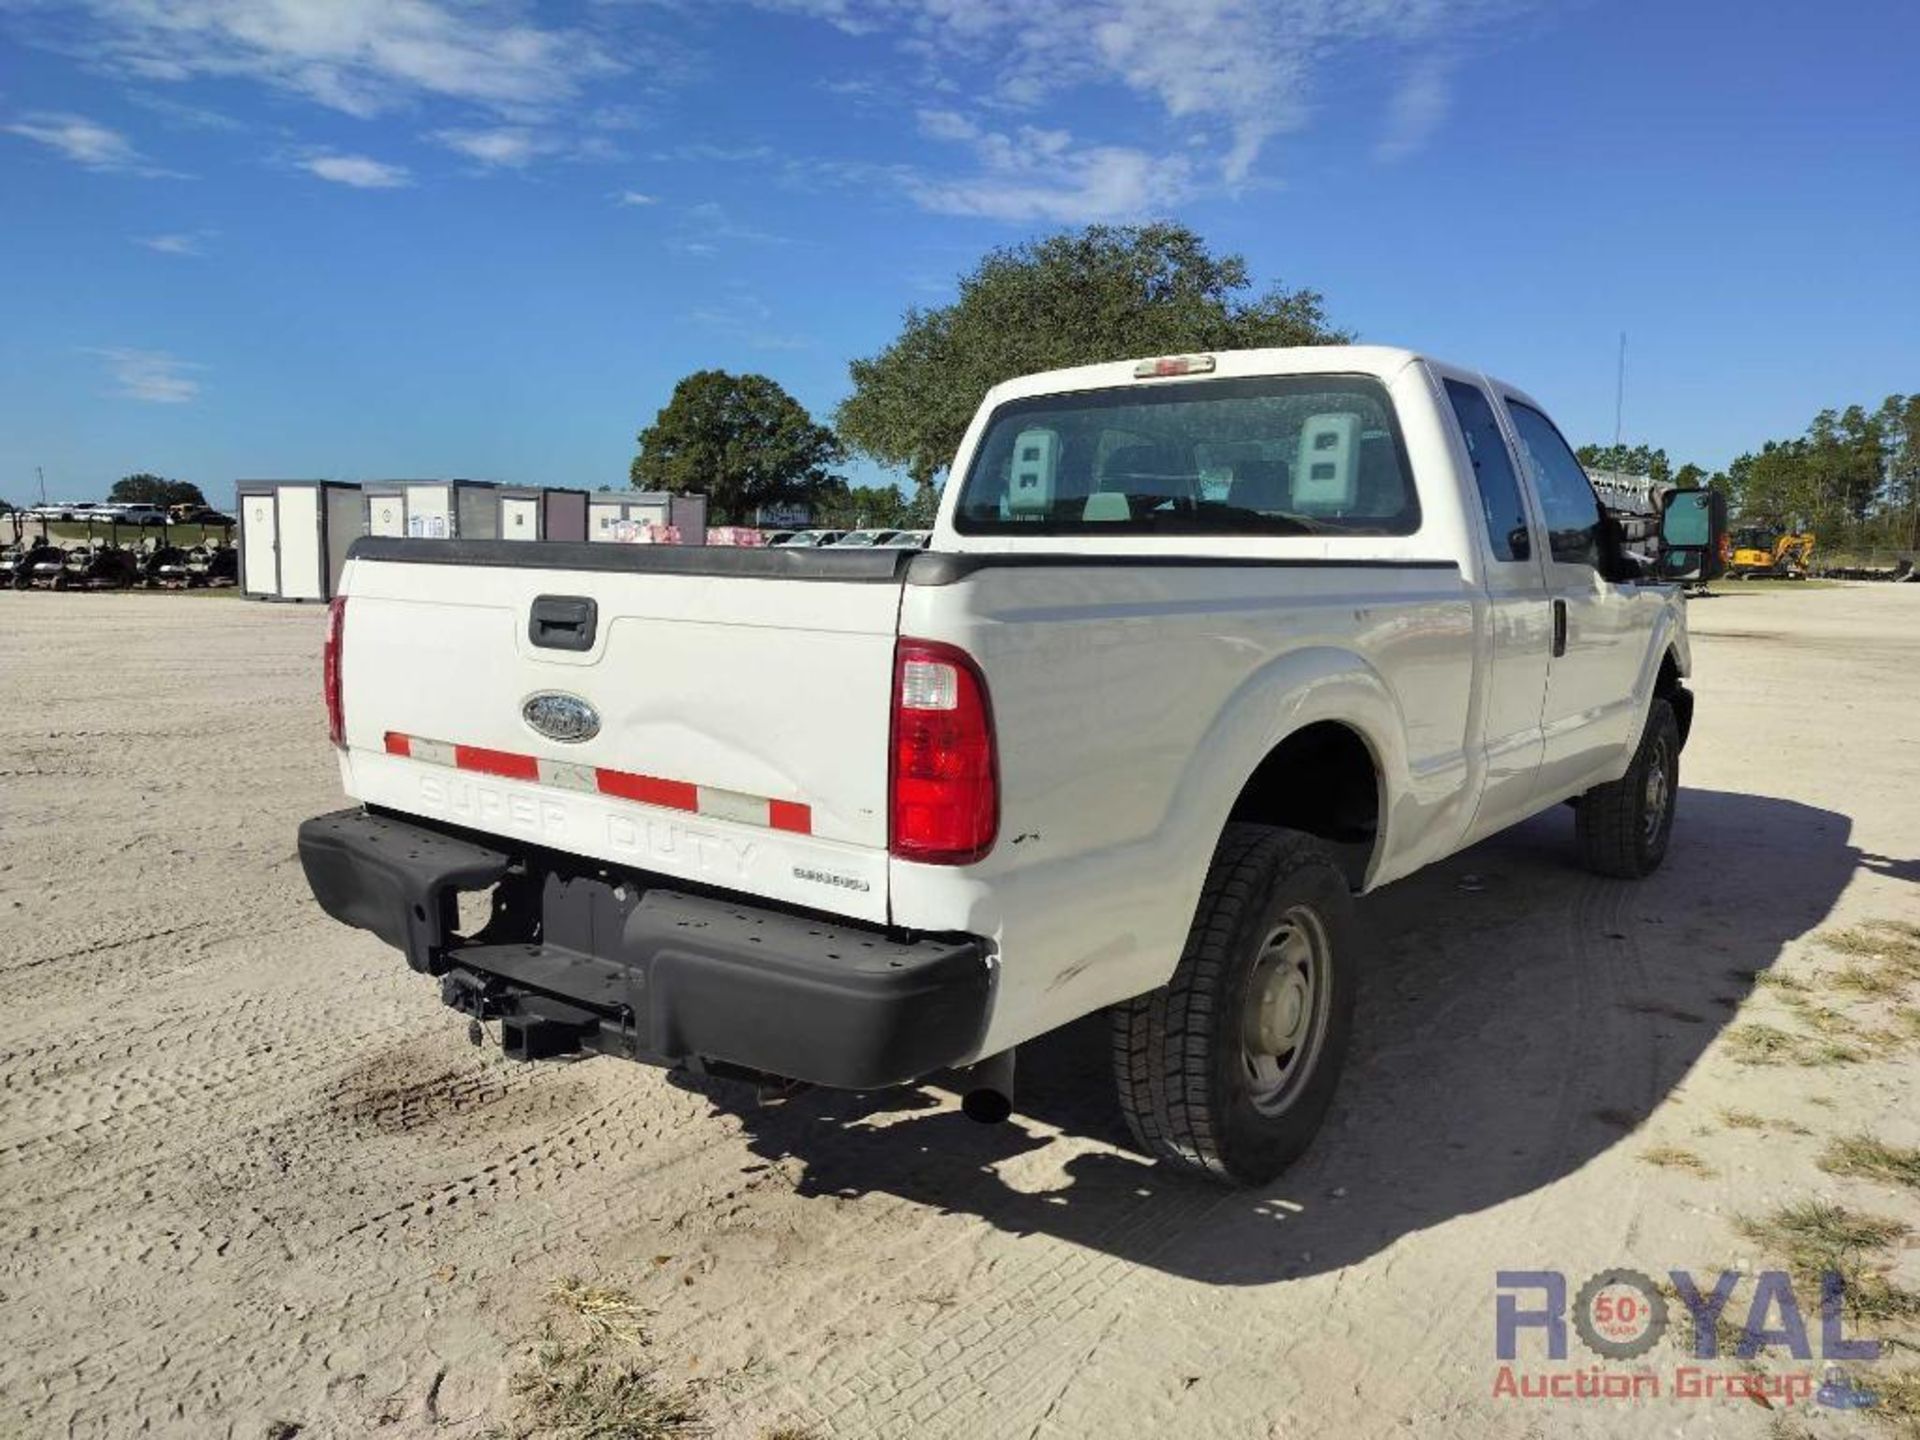 2015 Ford F250 4x4 Pickup Truck - Image 3 of 28